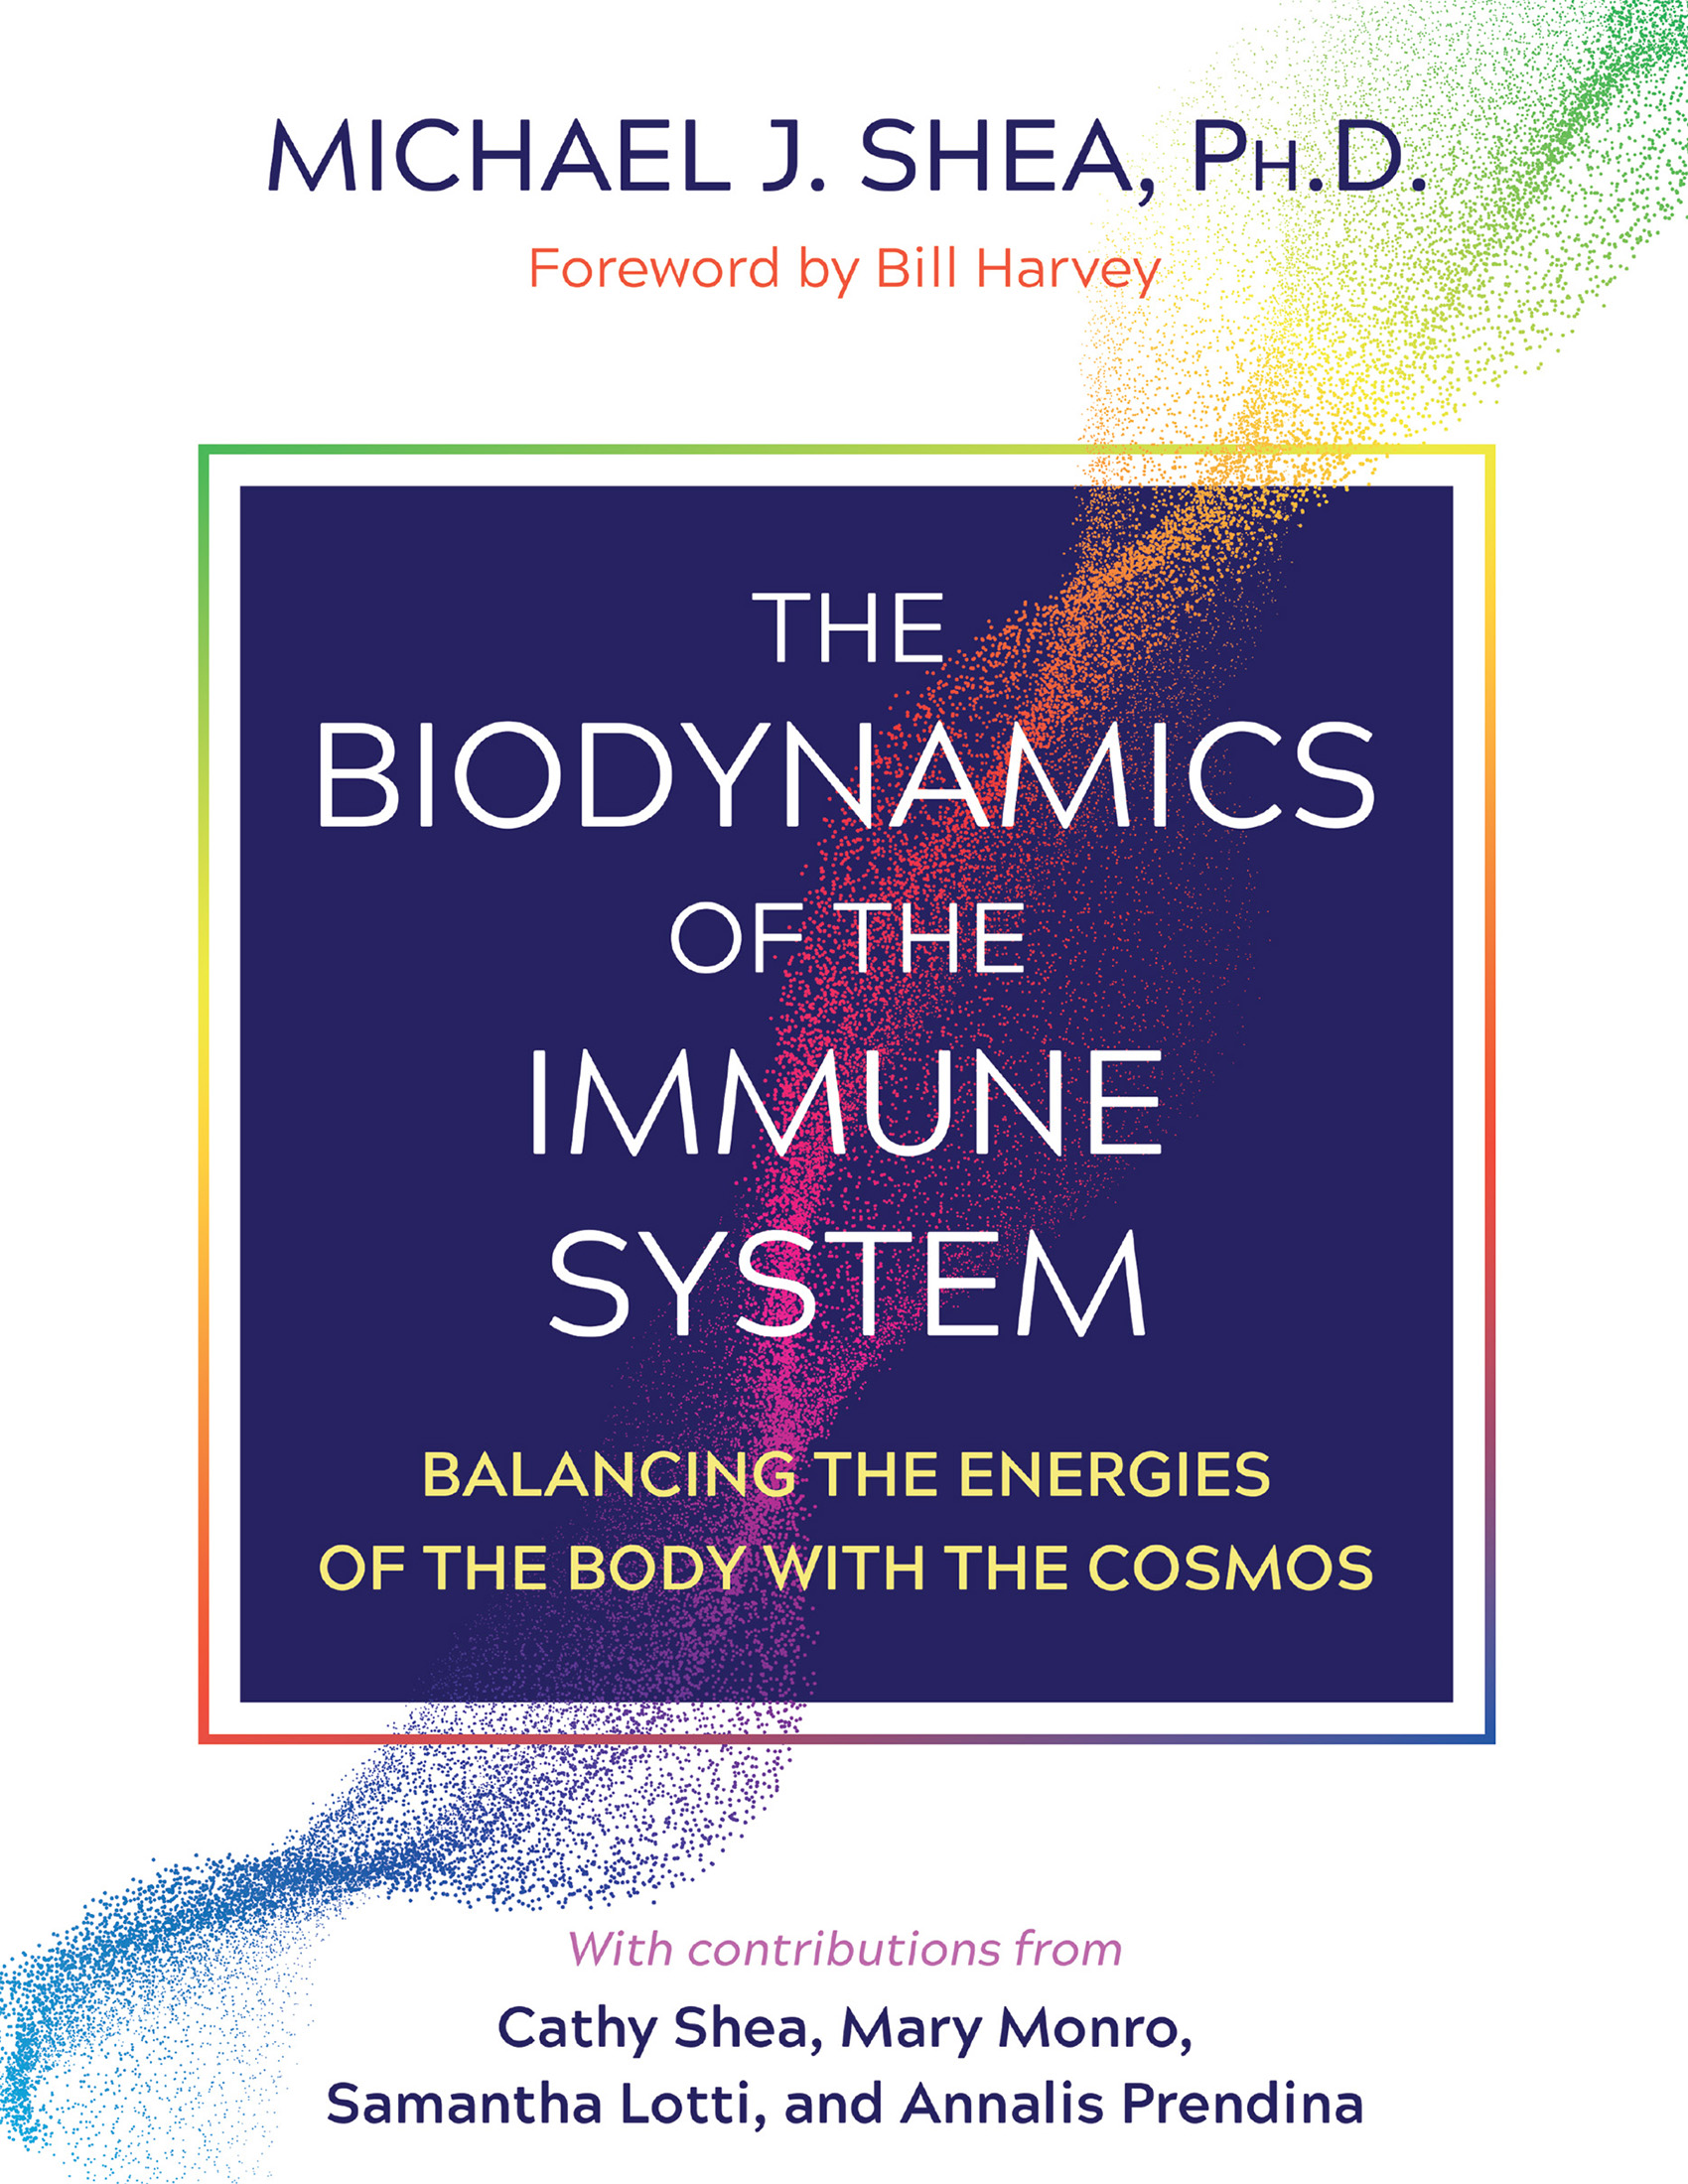 The Biodynamics of the Immune System Balancing the Energies of the Body with the Cosmos - image 1